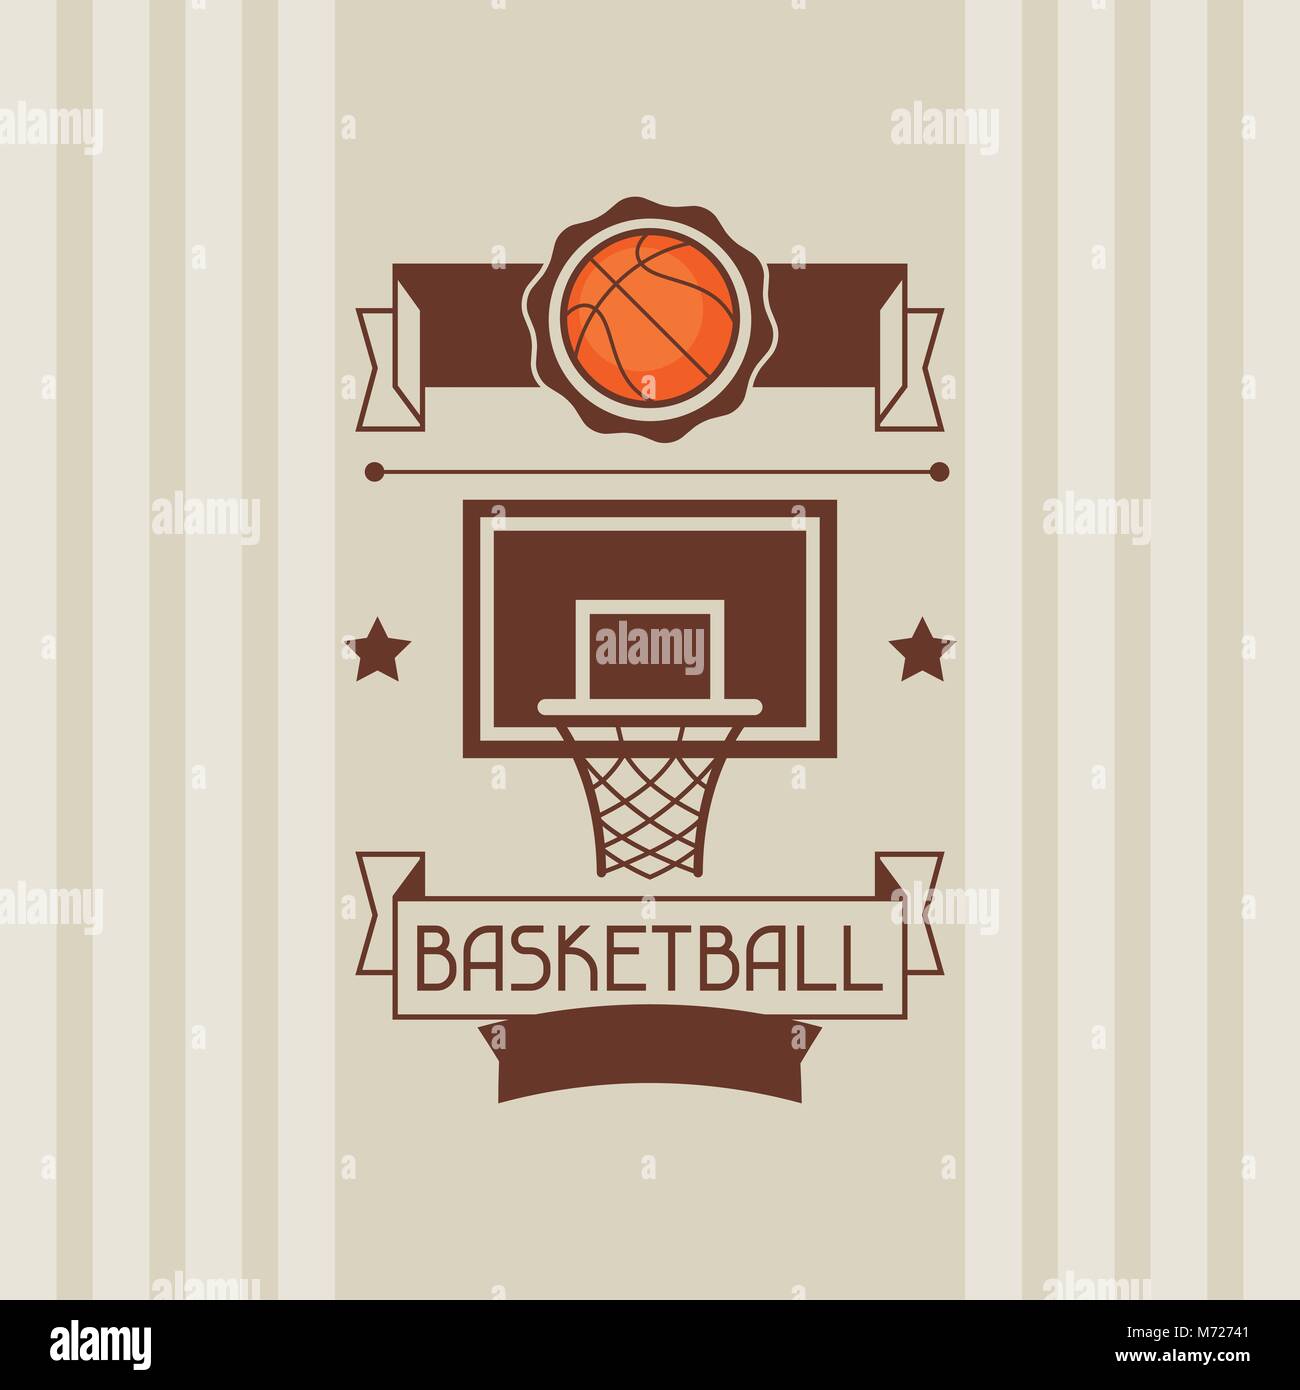 Background with basketball, ball, hoop and labels Stock Vector